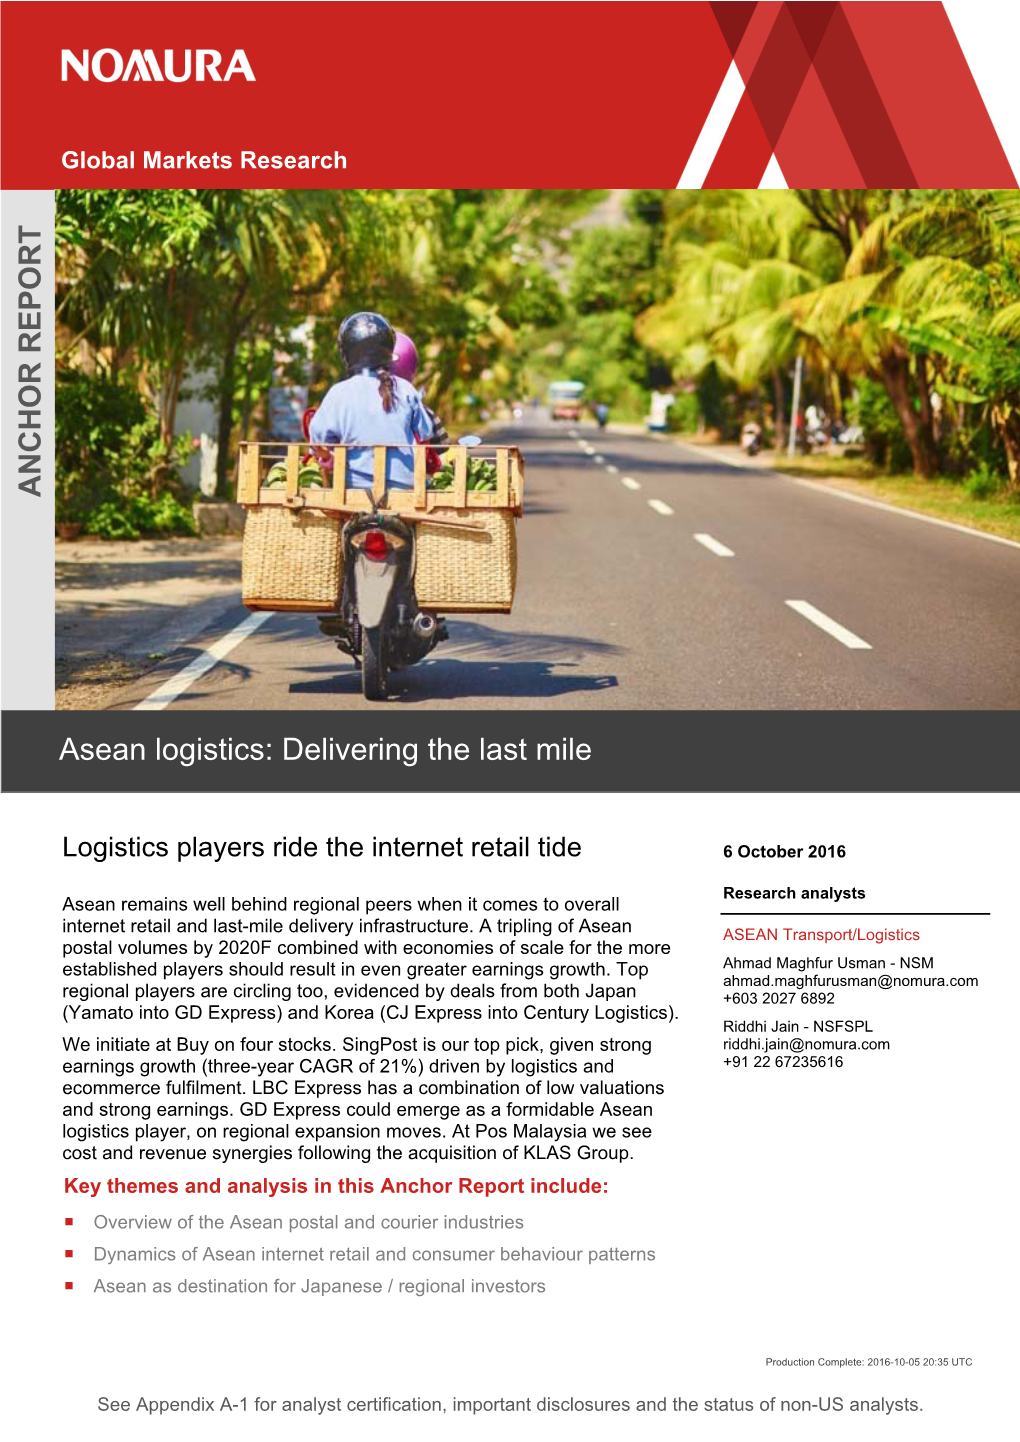 ANCHOR REPORT Asean Logistics: Delivering the Last Mile